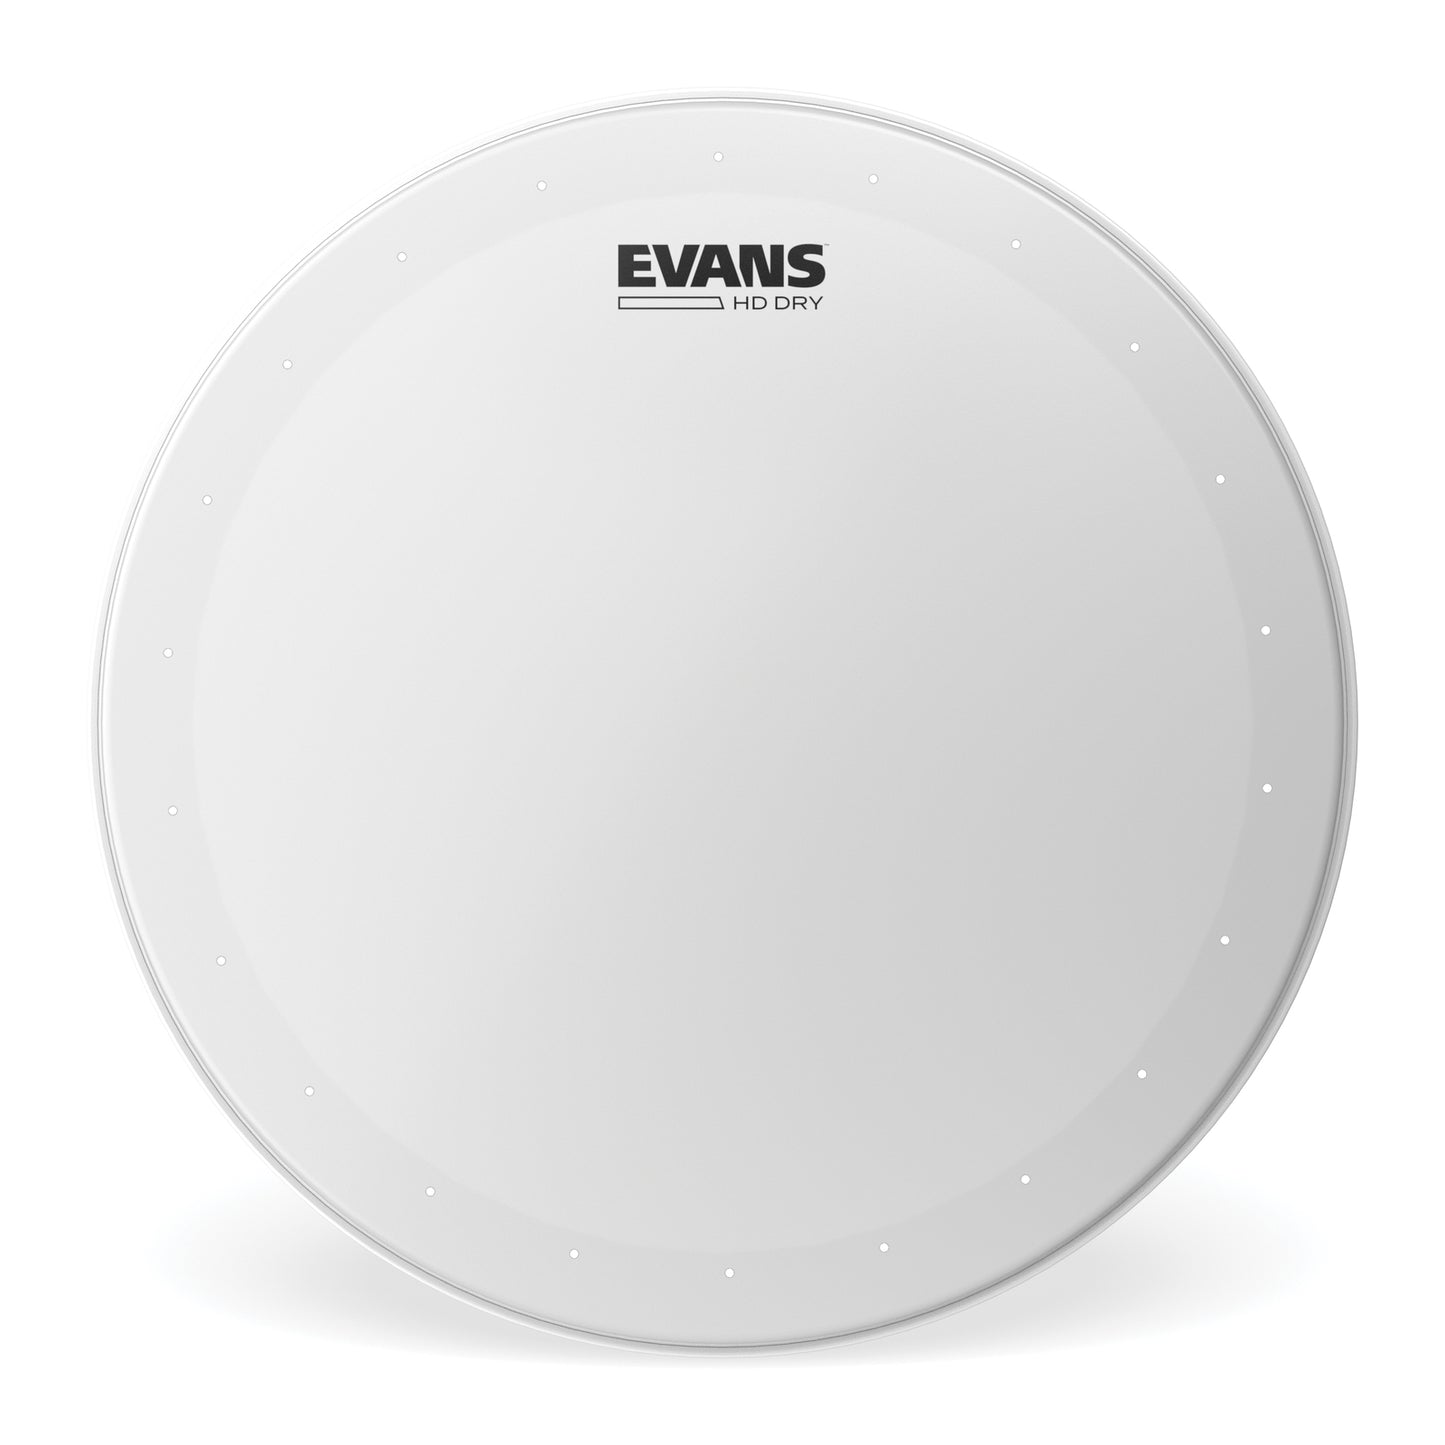 Evans Drumheads B14HDD HD DRY Snare Batter, 14"